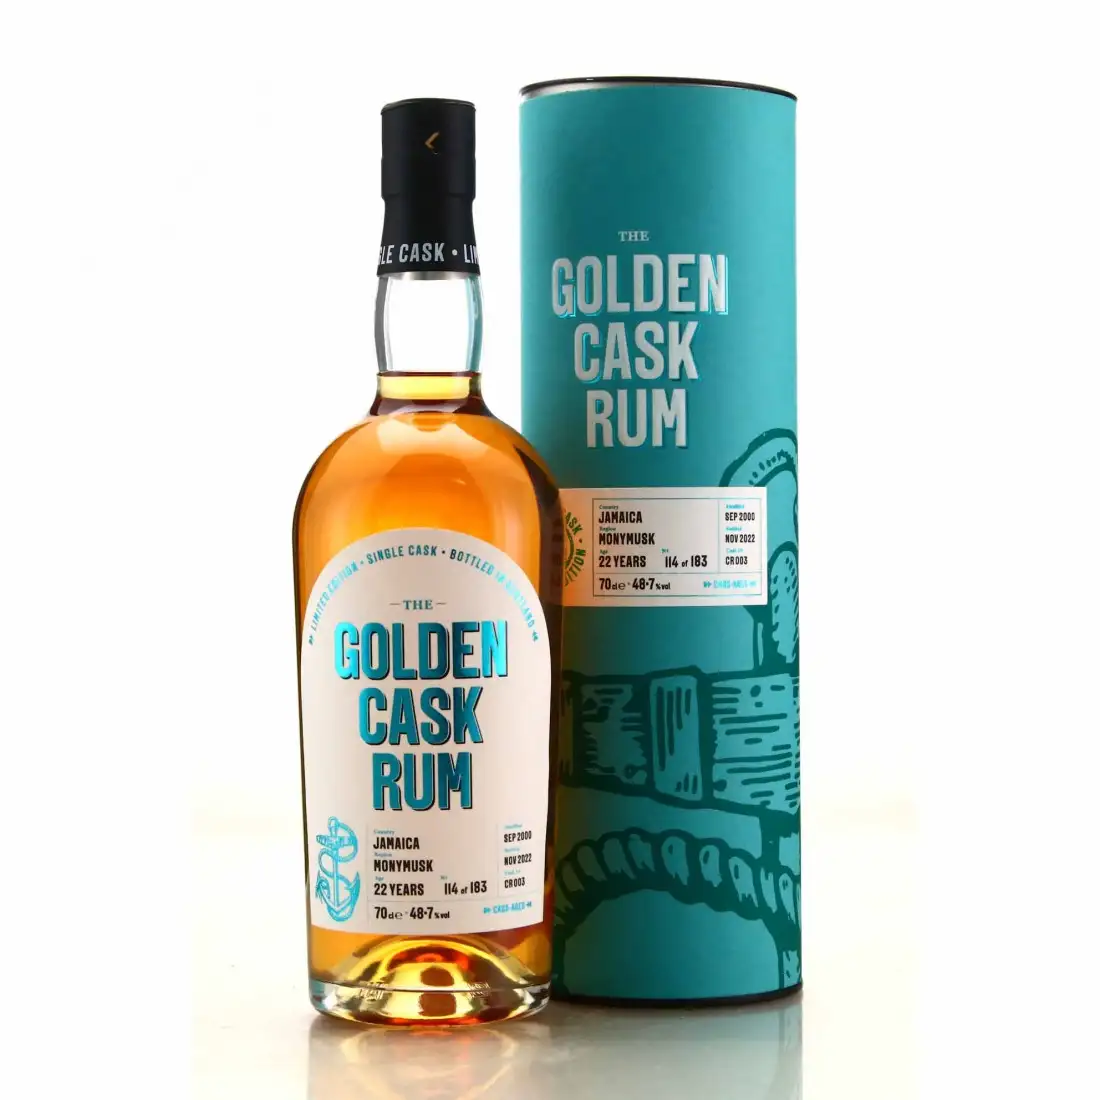 Image of the front of the bottle of the rum Golden Cask Rum